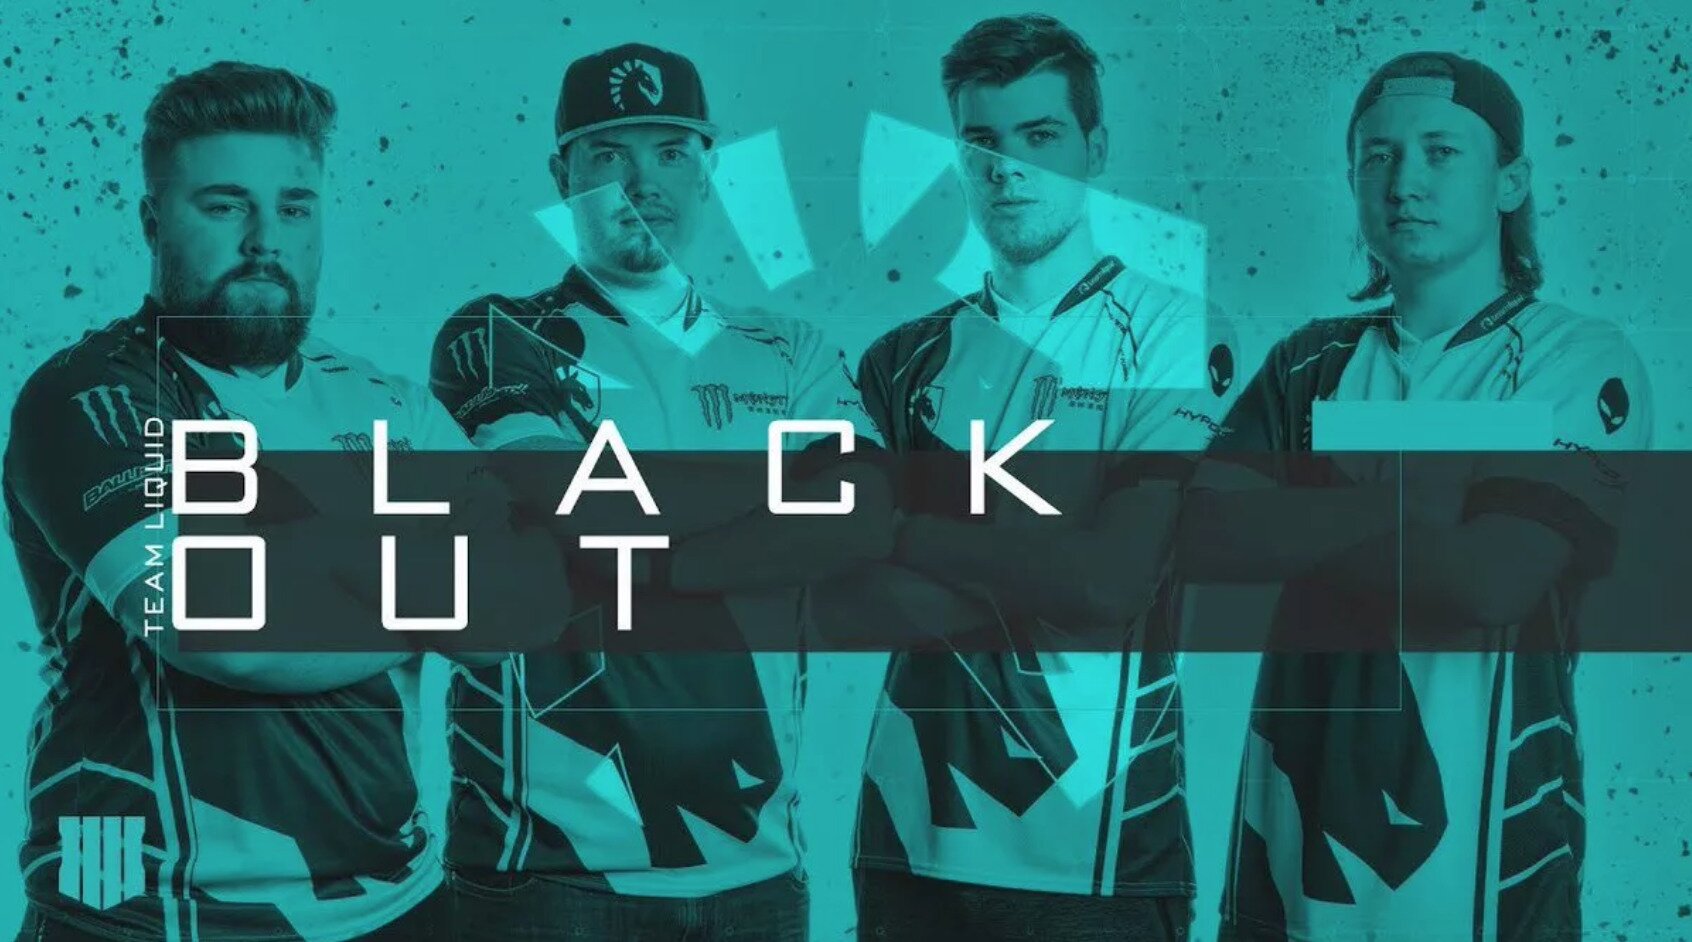 Team Liquid announced that they will have their own Blackout roster, and will be setting up two Blackout leagues to help grow the scene and new talent.